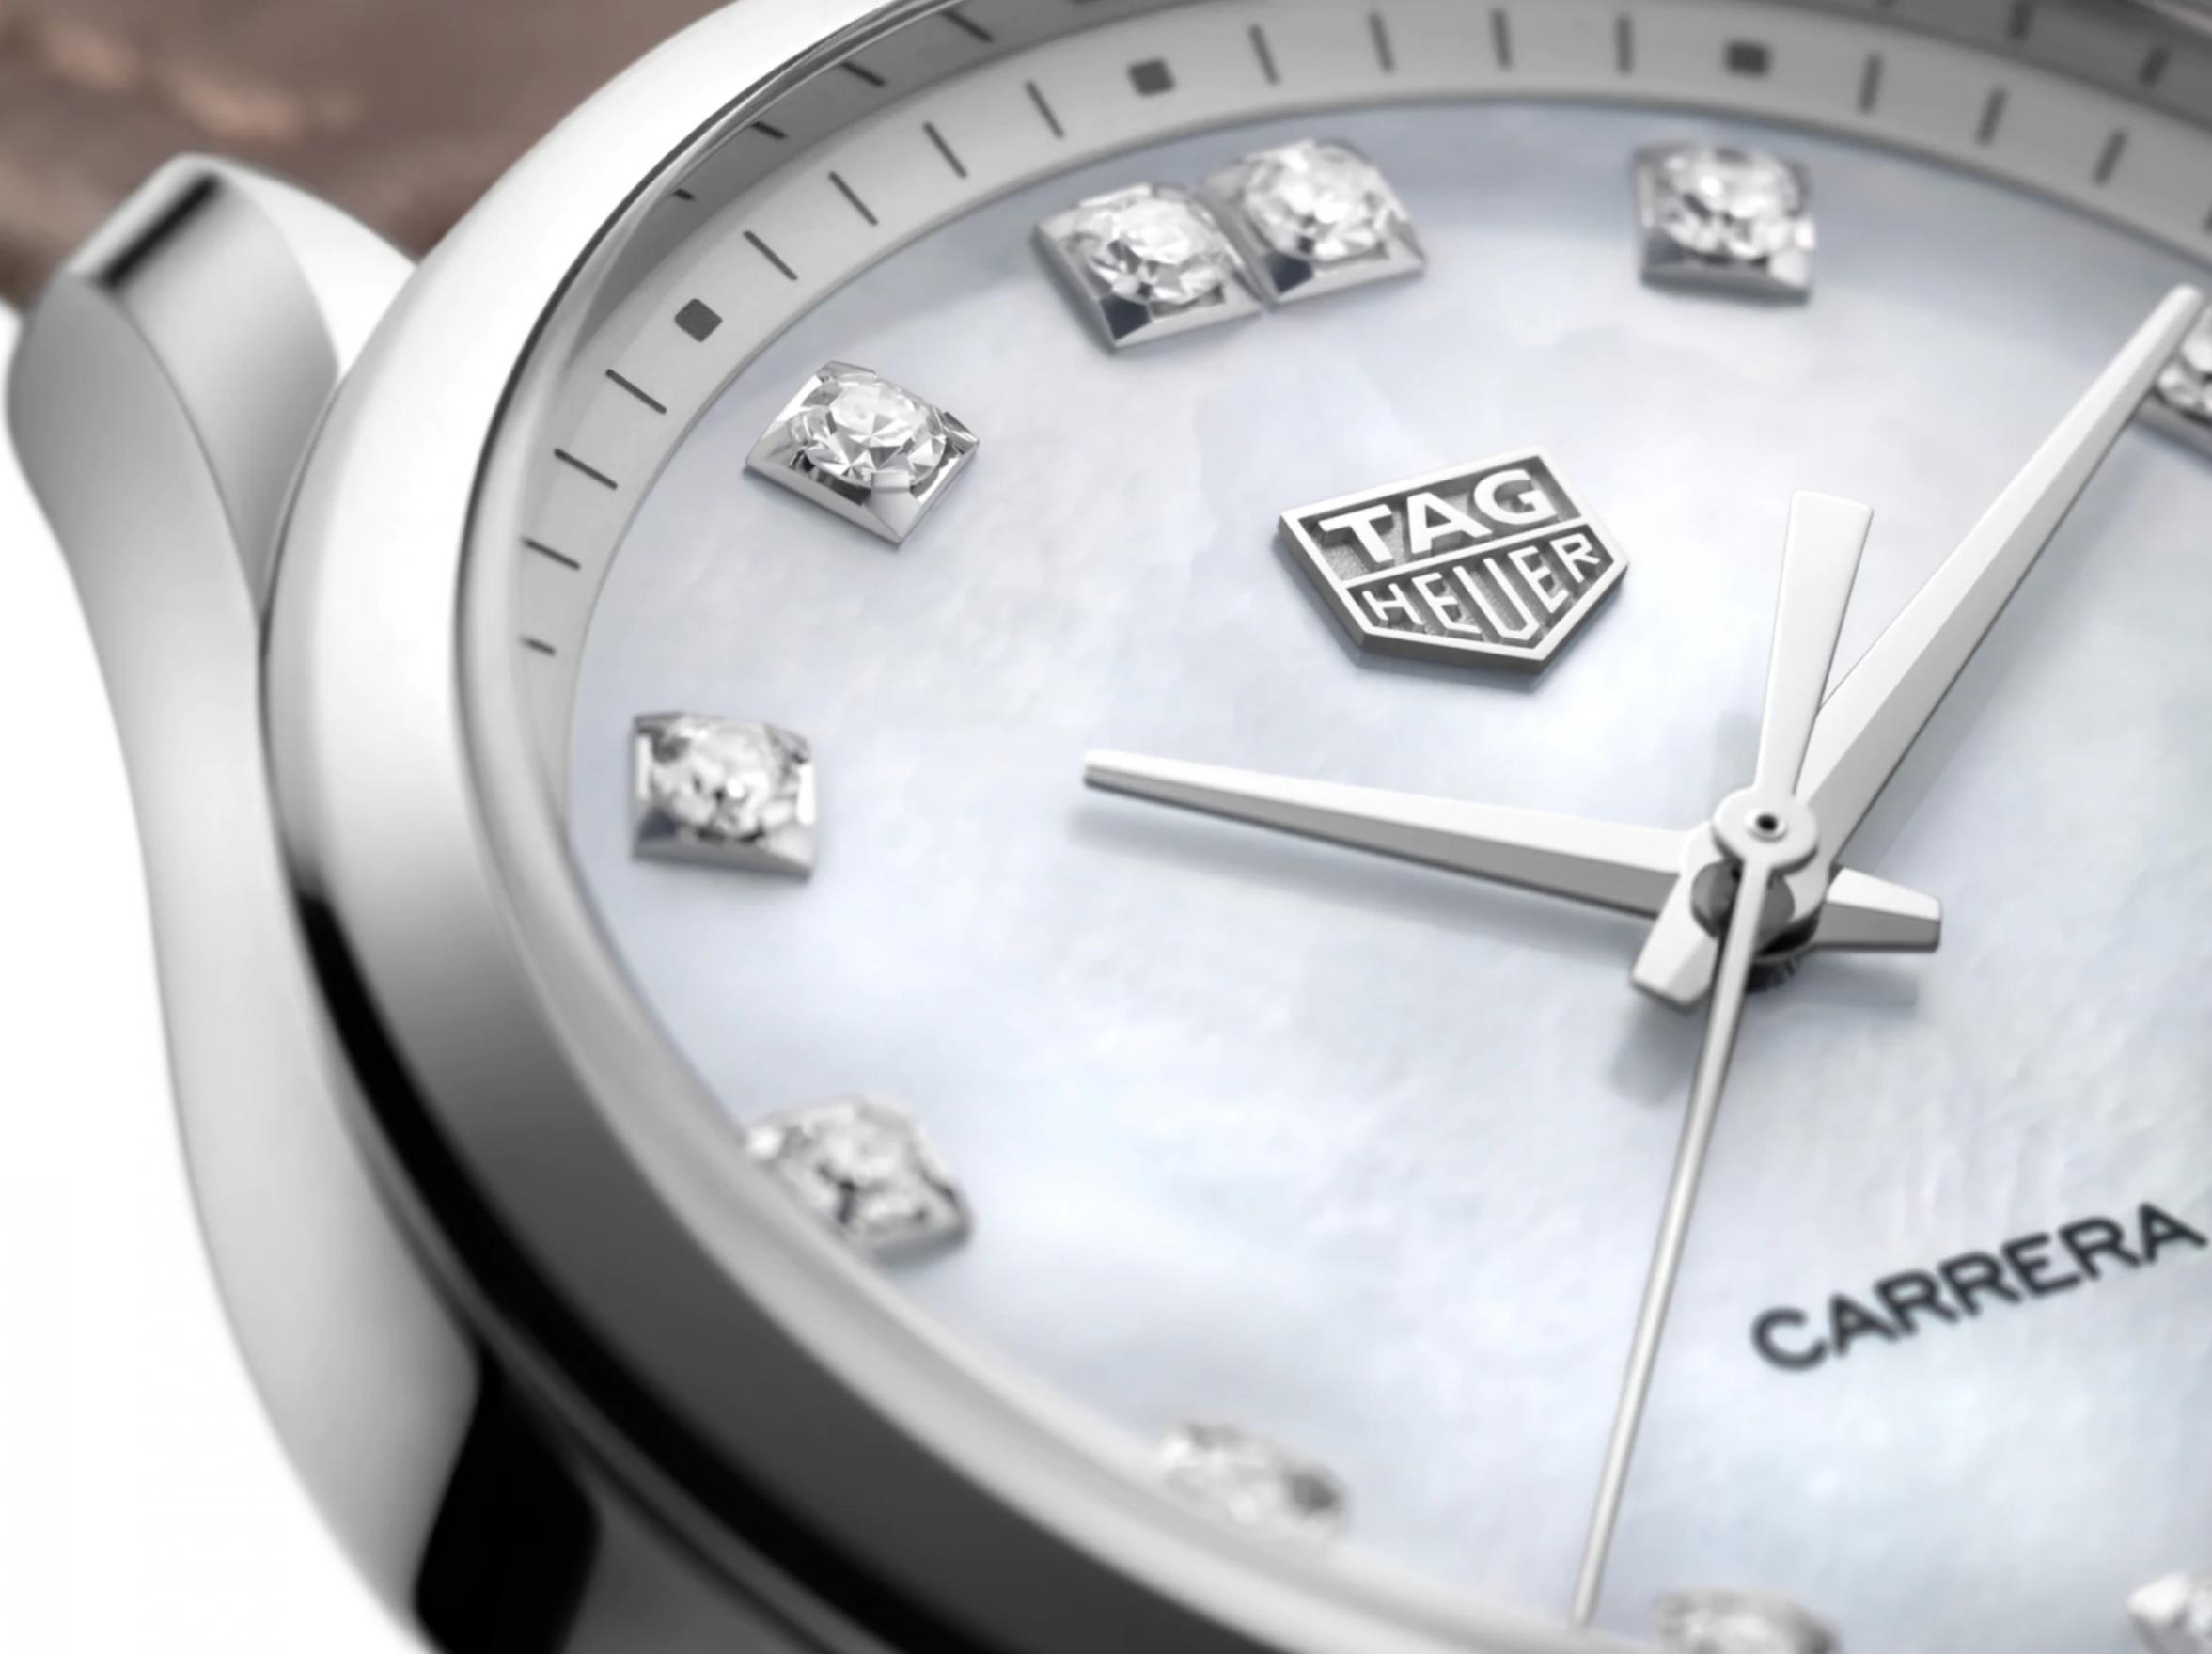 The white mother-of-pearl dial fake watch has diamond hour marks.